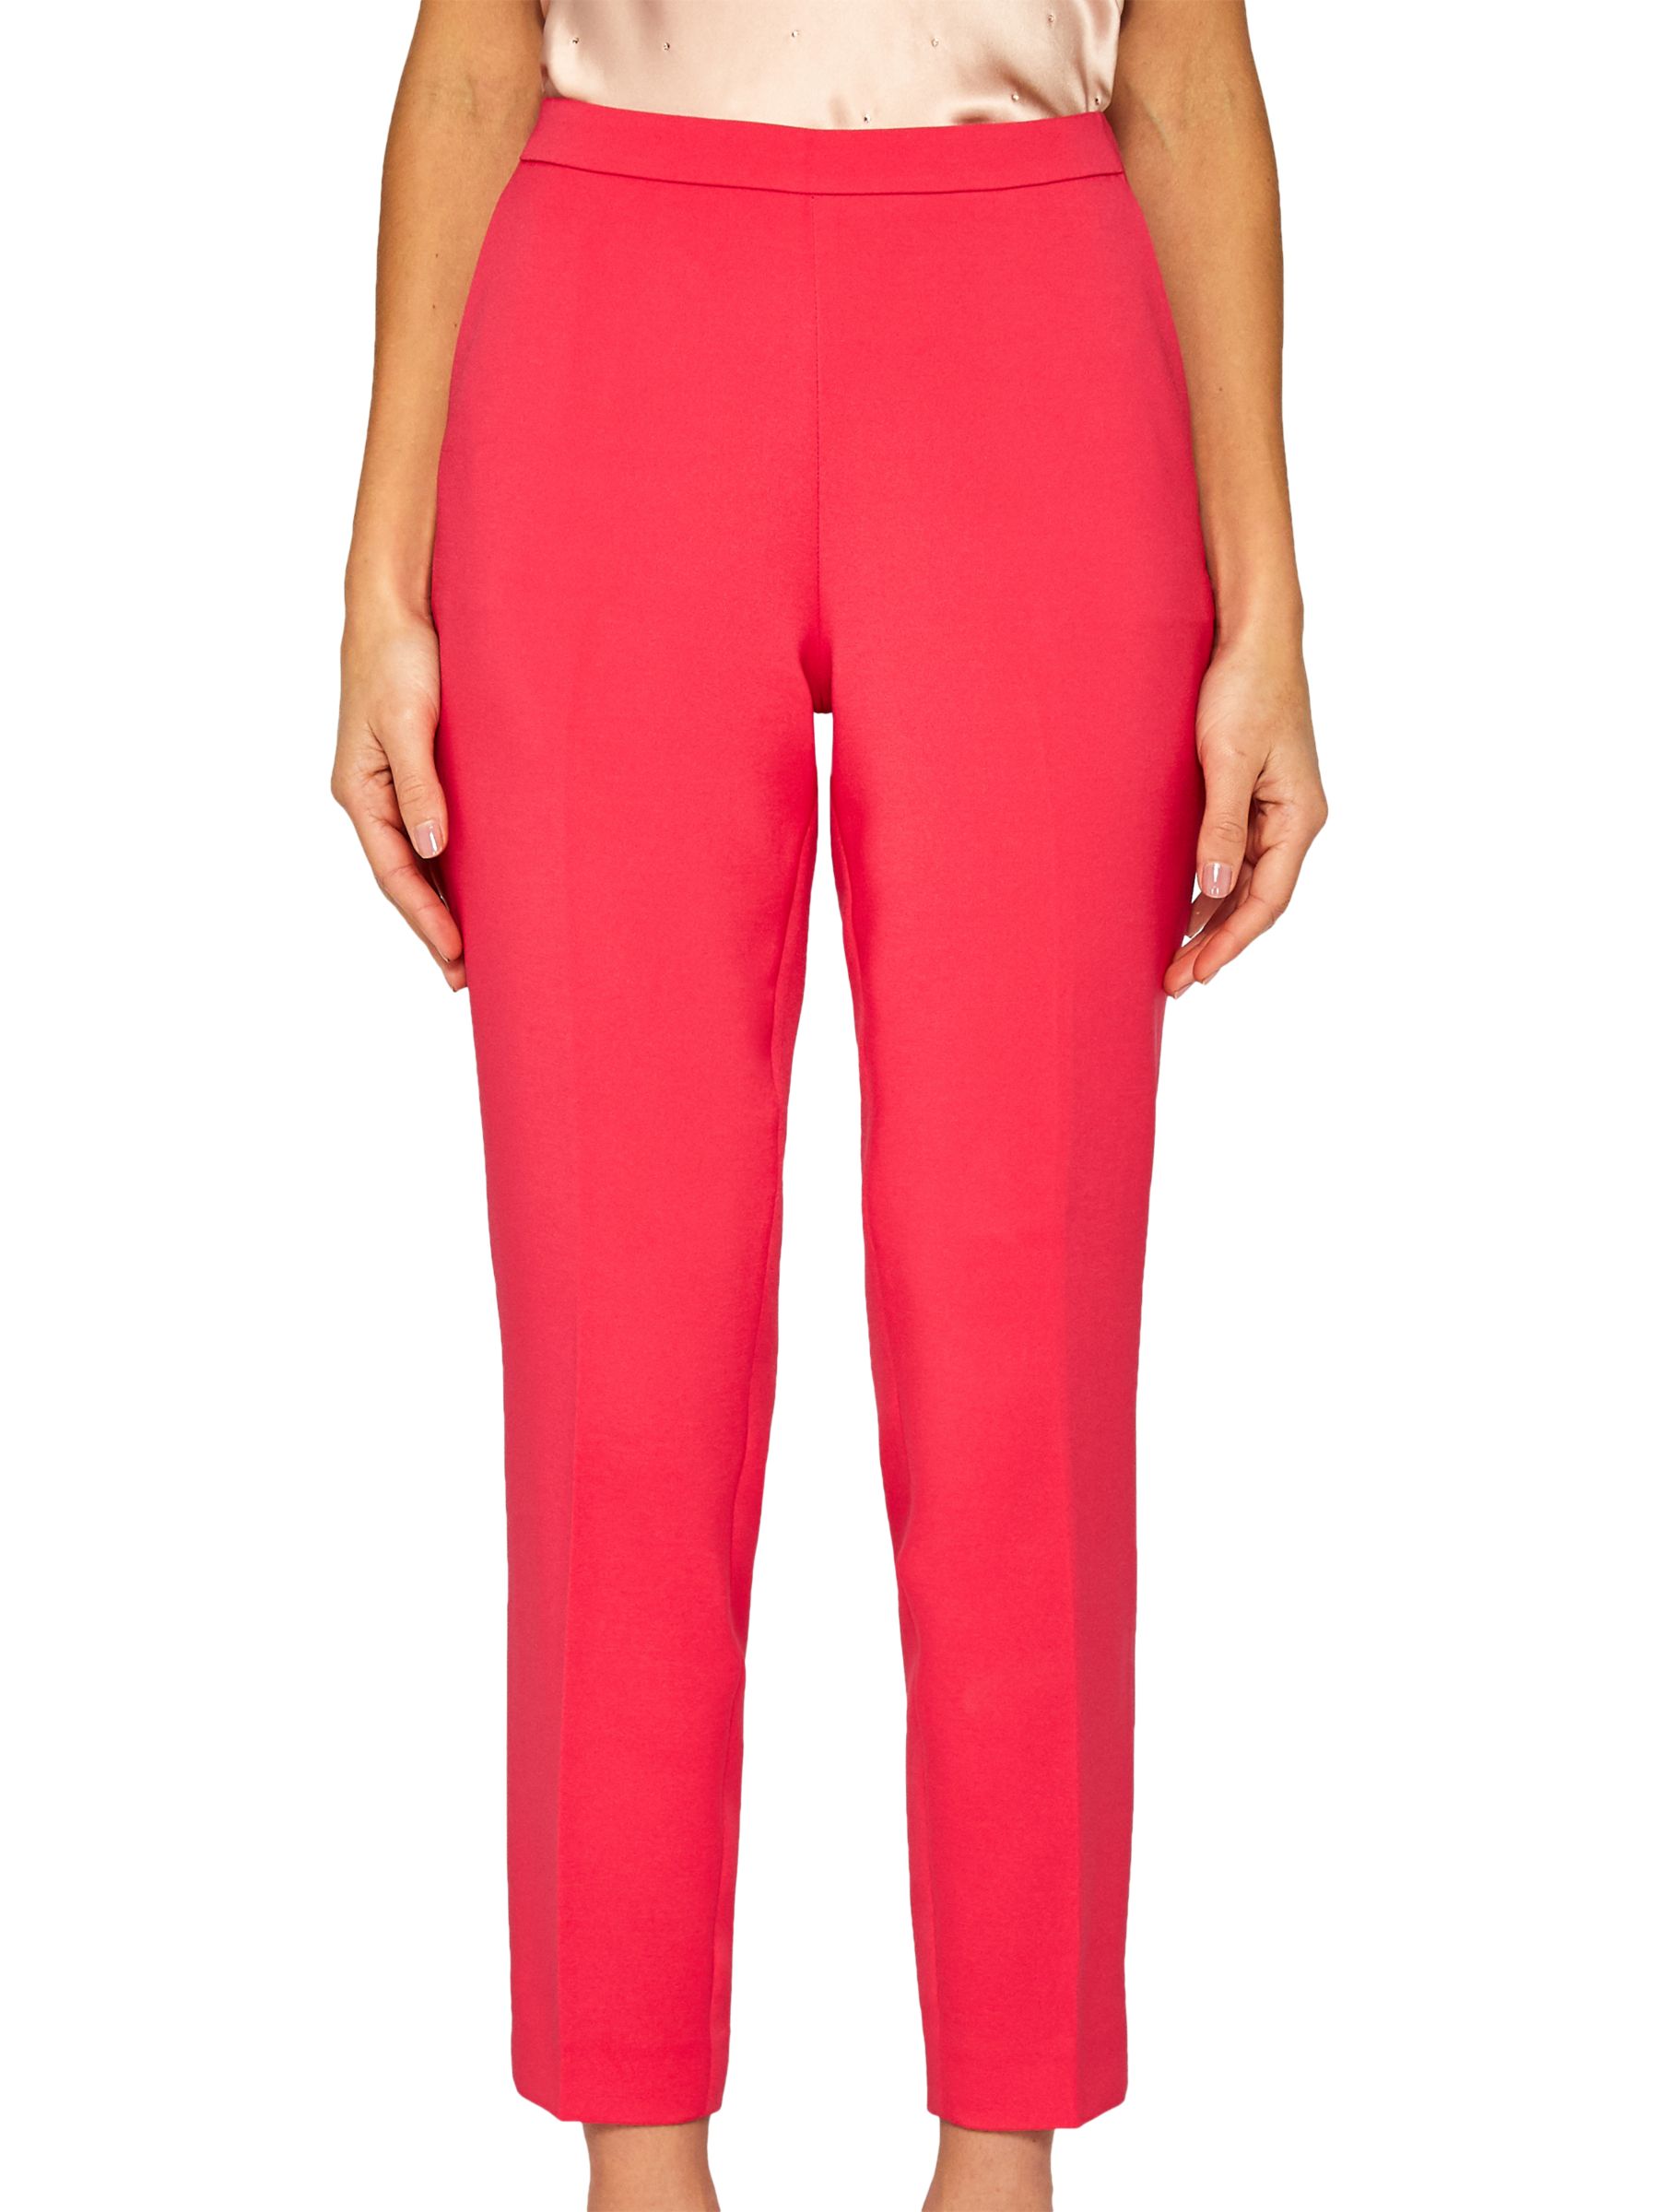 Ted Baker Anitat Tailored Ankle Grazer Trousers, Deep Pink